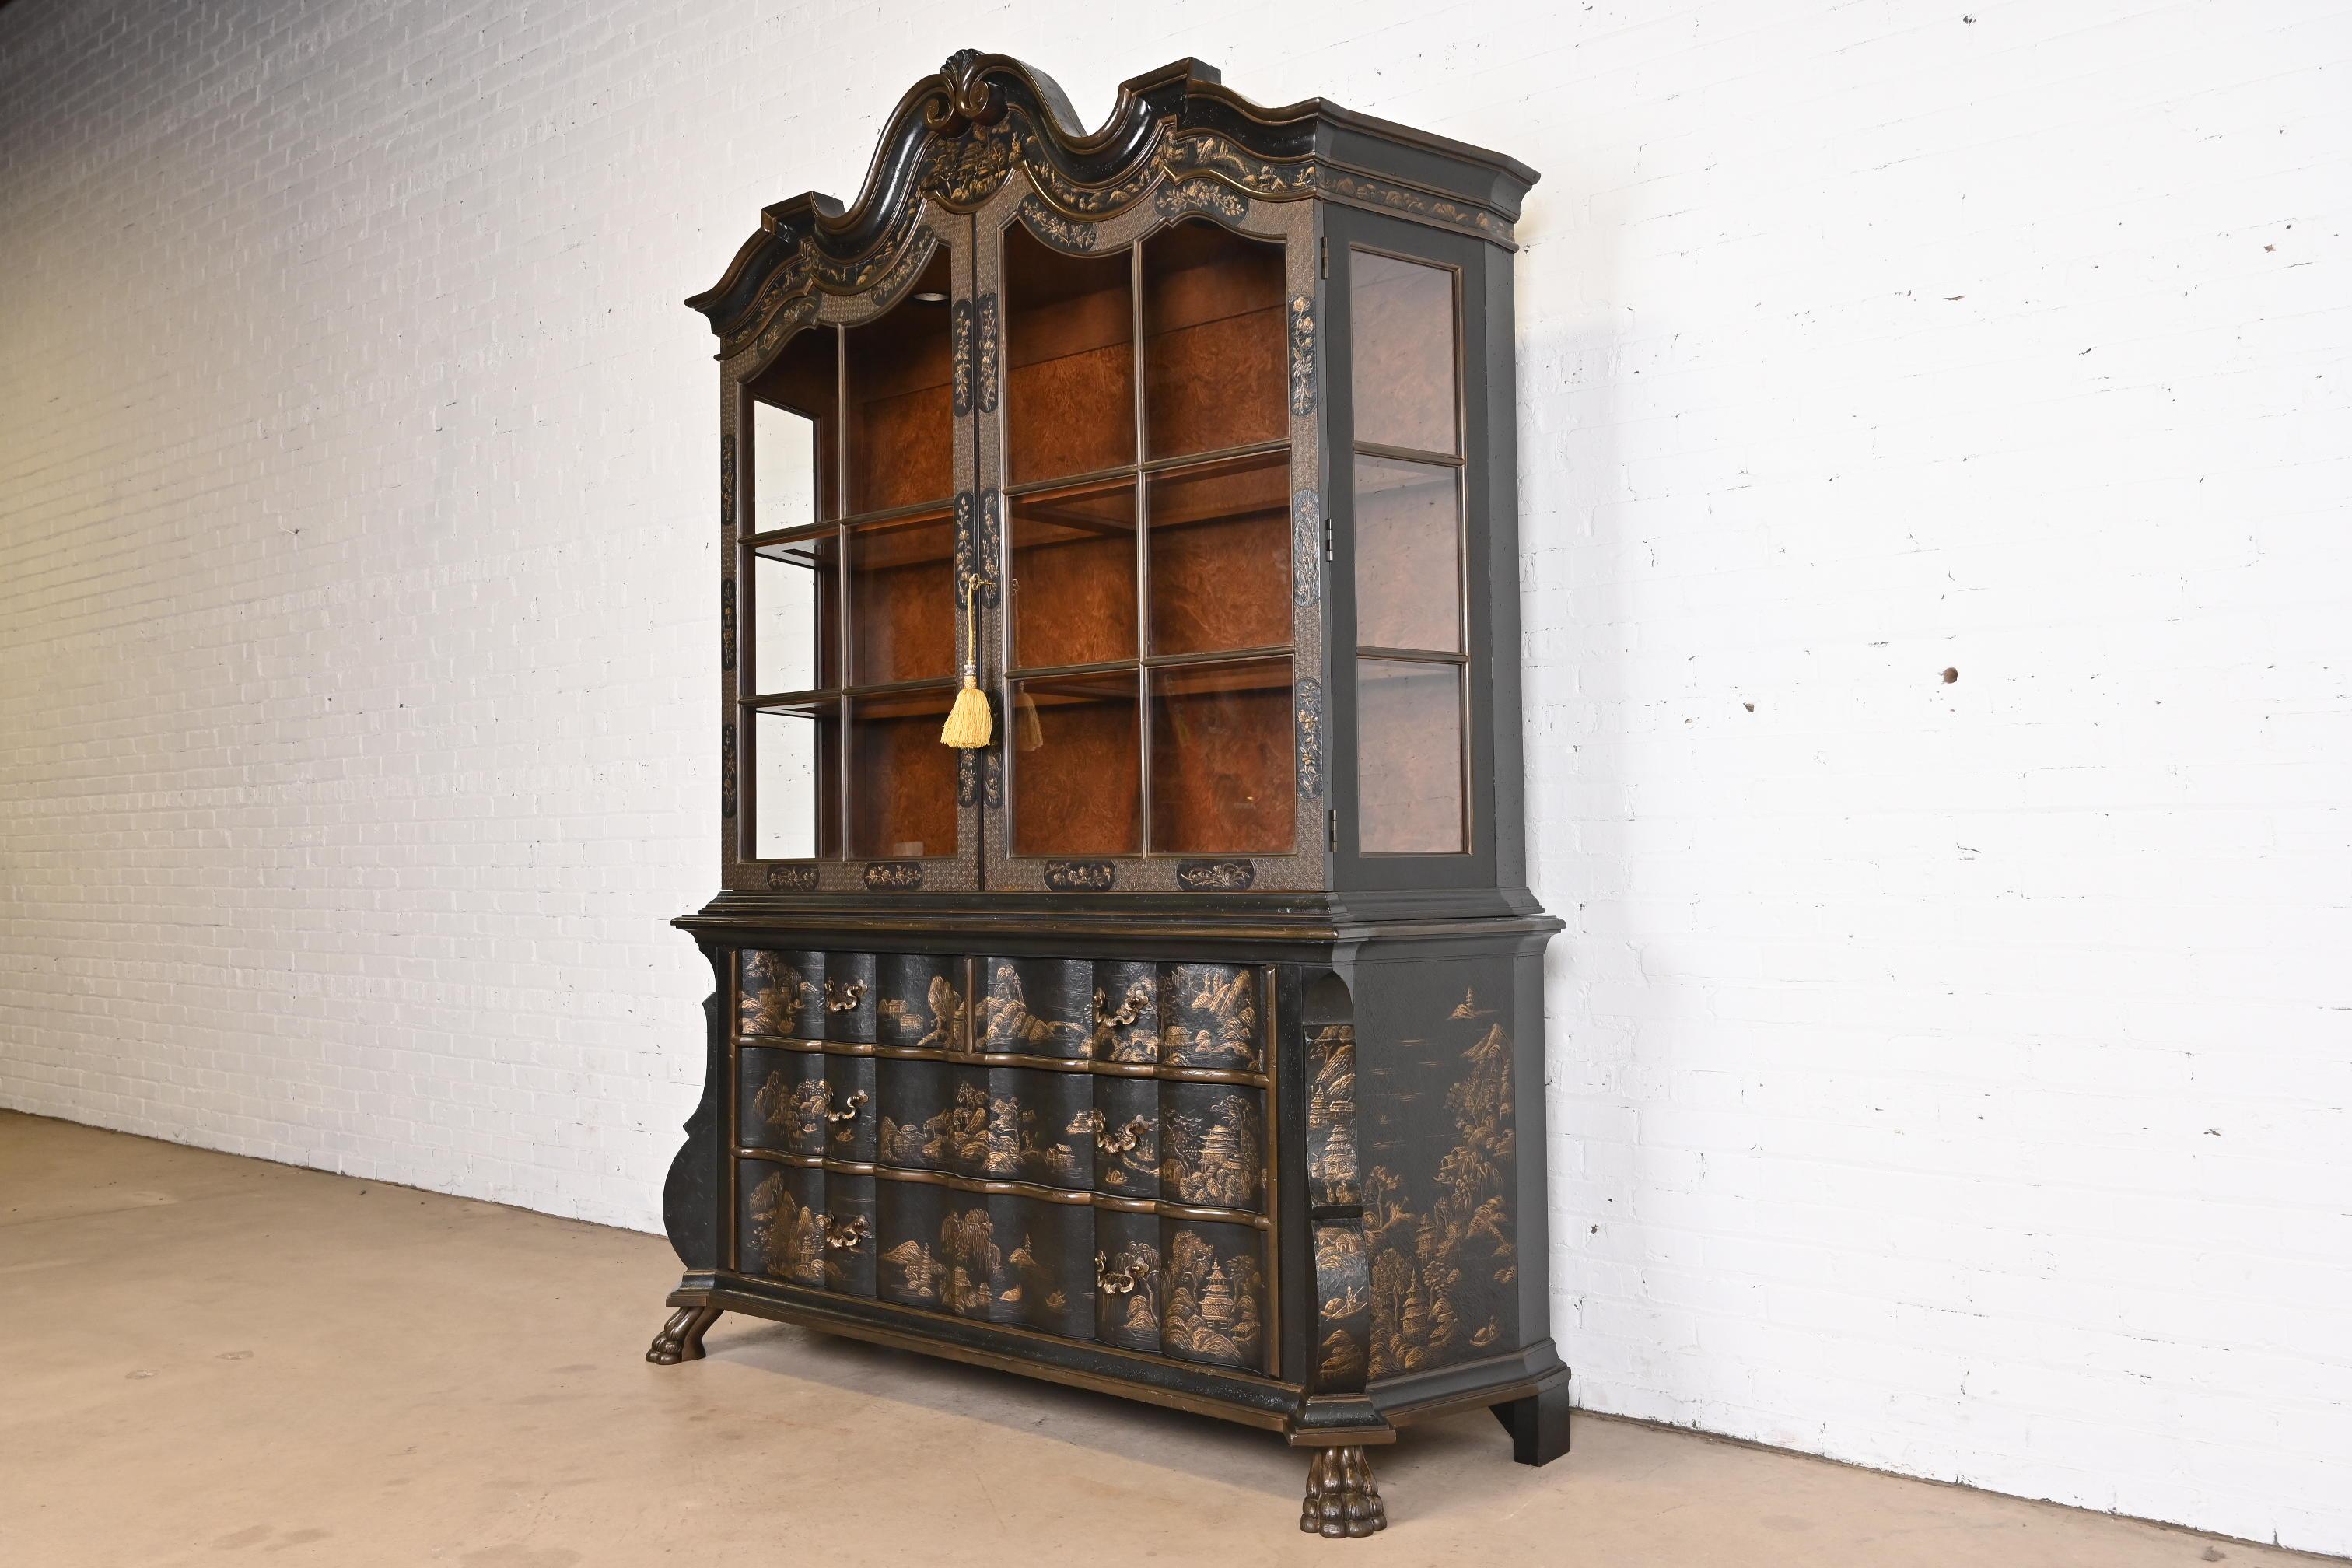 A gorgeous Dutch Baroque Chinoiserie style breakfront bookcase or dining cabinet

By Baker Furniture

USA, Late 20th Century

Black lacquer, with Asian scenes painted in gold relief, mullioned glass front doors, and burl wood interior. Cabinet